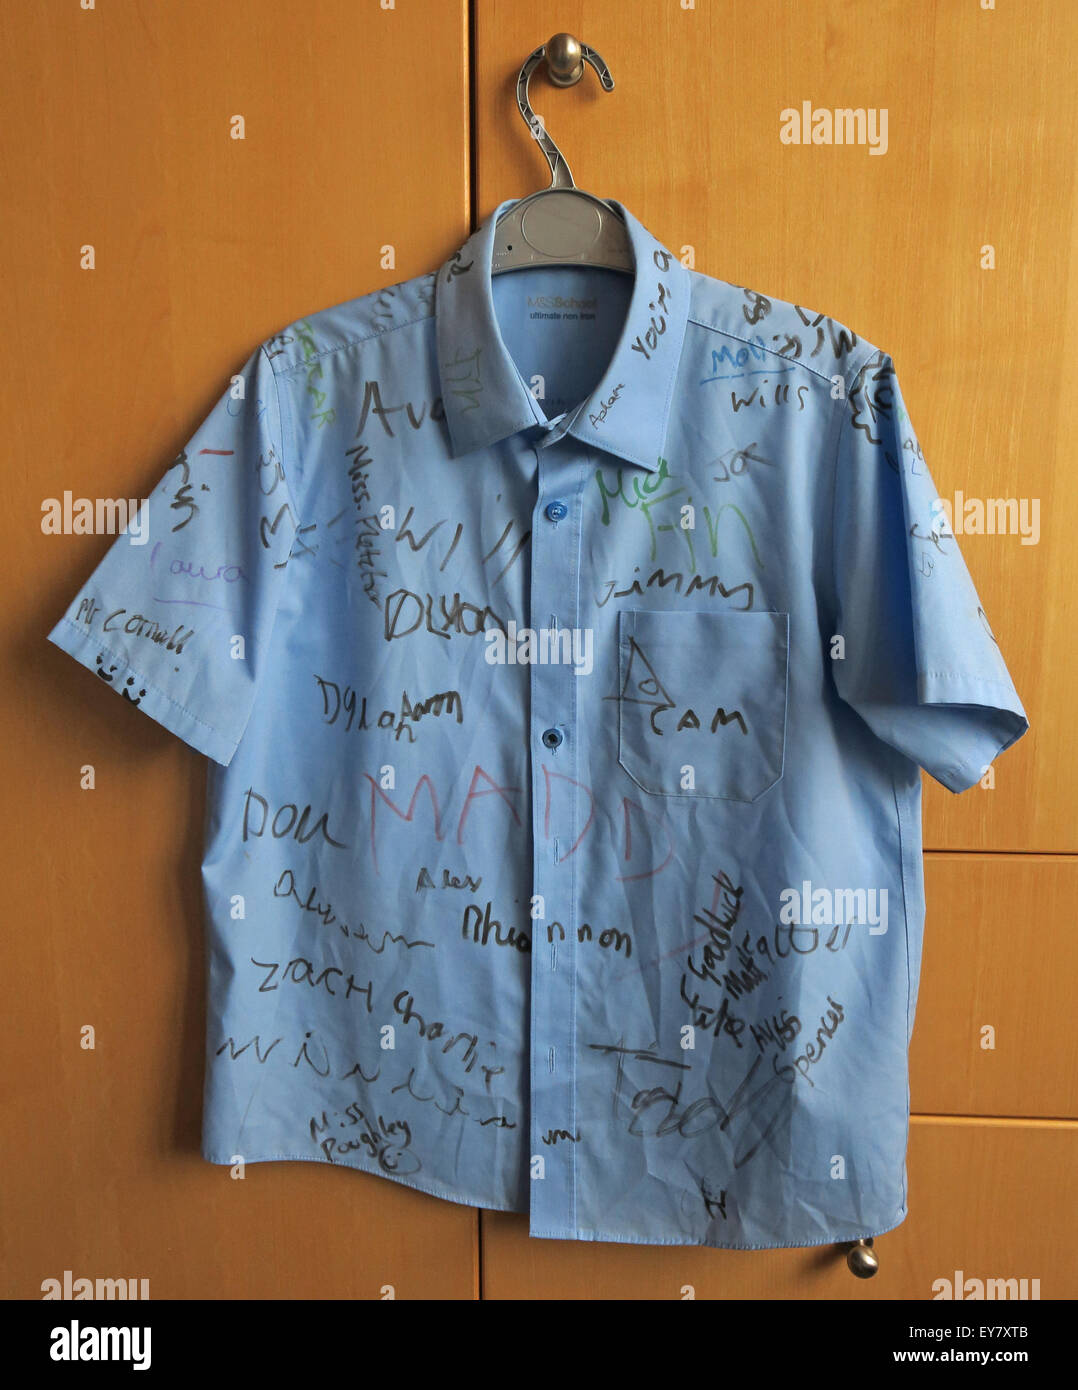 School Leavers Shirt with signatures of classmates Stock Photo